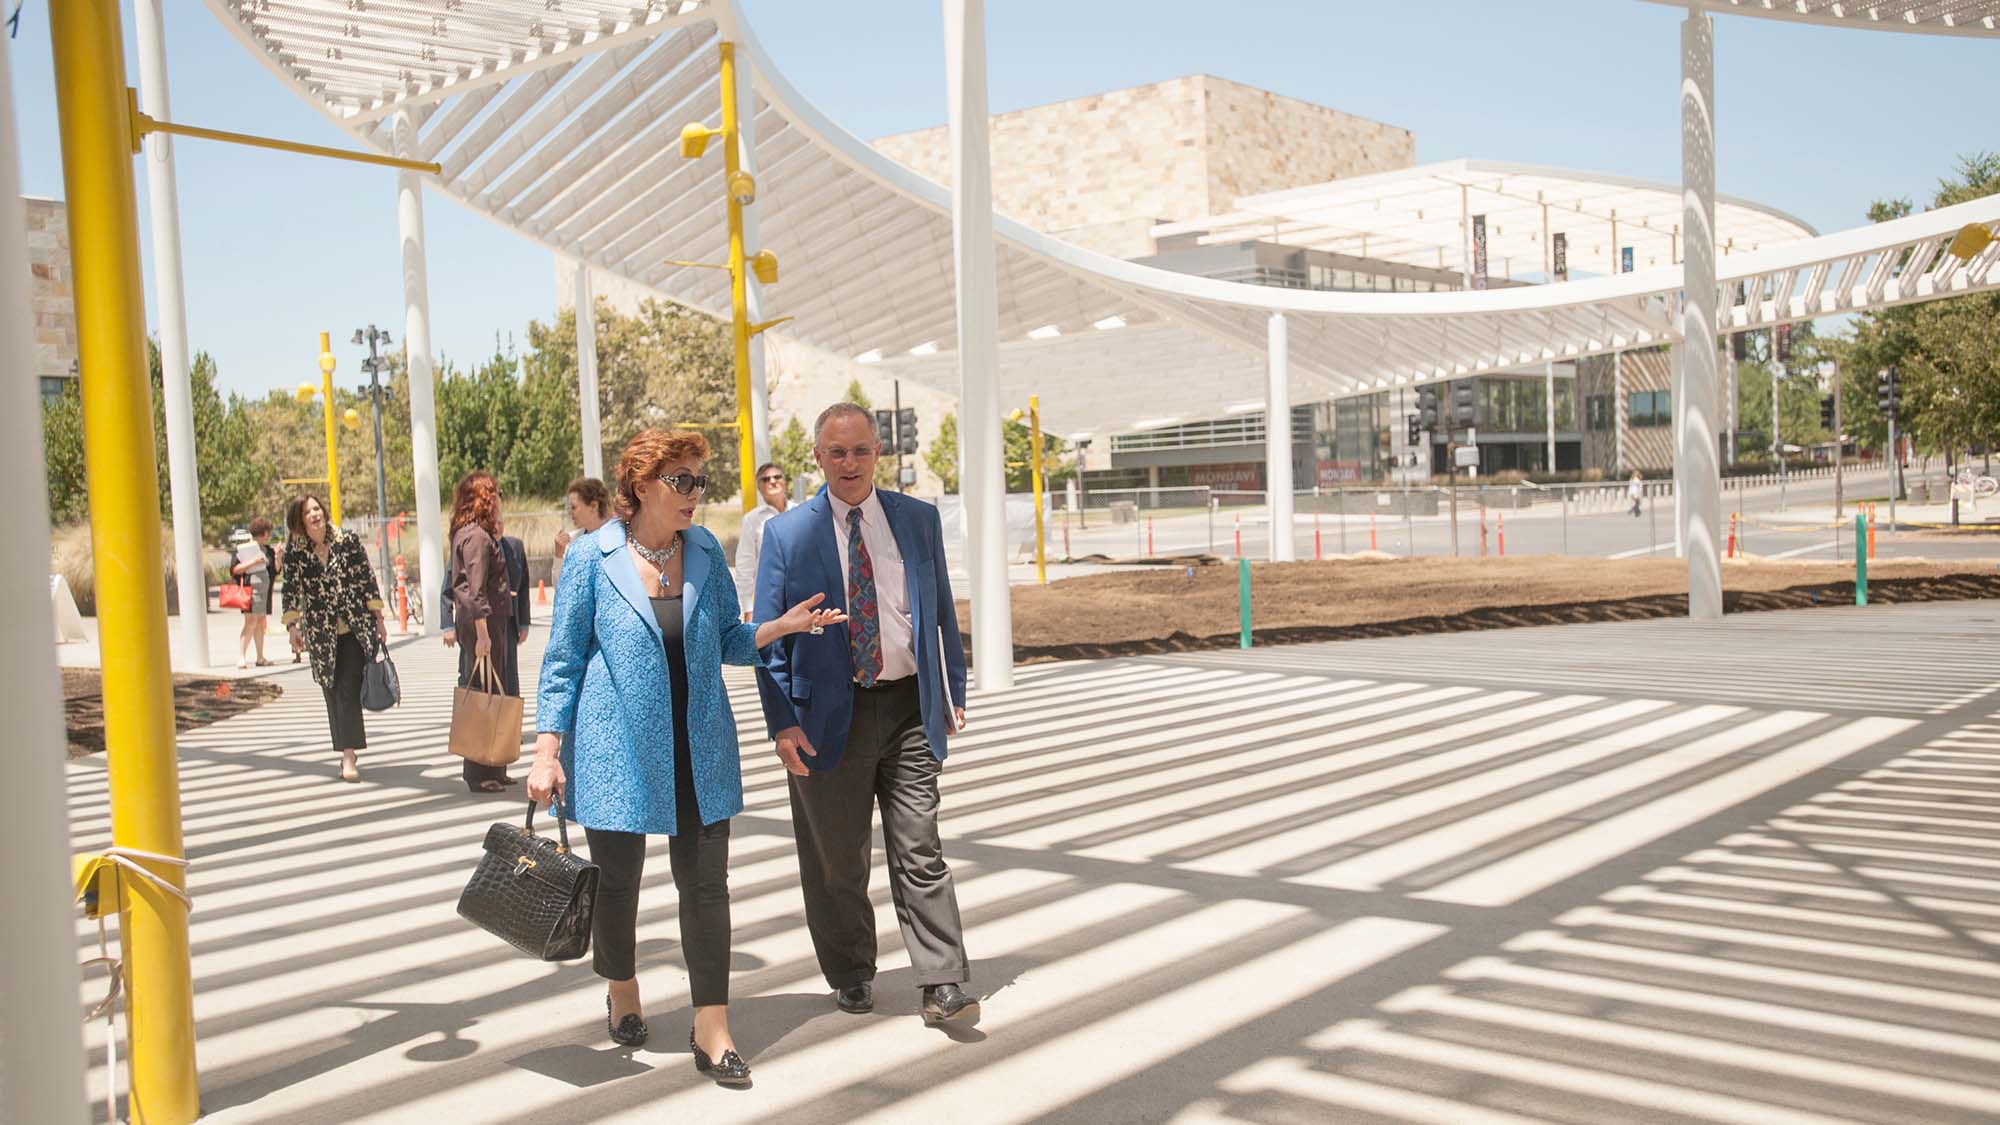 Maria Manetti Shrem walks with Ralph Hexter under the overhang outside the Jan Shrem and Maria Manetti Shrem Museum of Art.